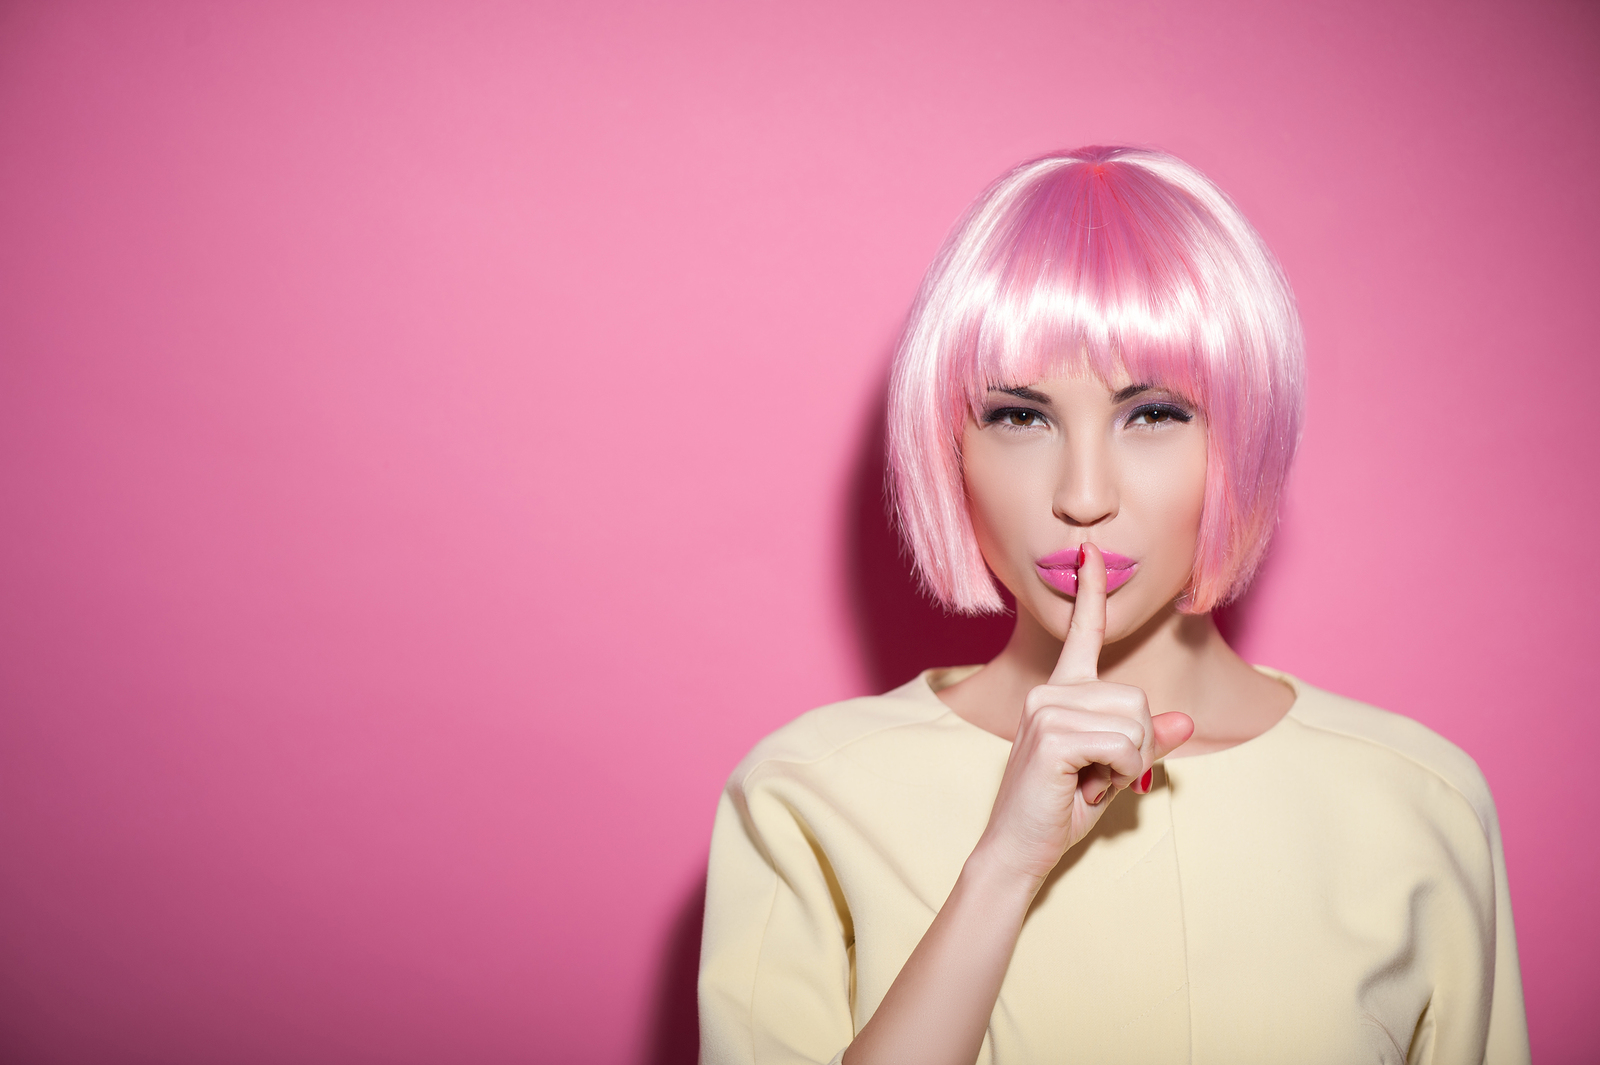 Save my secret. Portrait of attractive woman in a wig raising finger to her pink lips. She is standing and looking at camera mysteriously. Isolated and copy space in left side